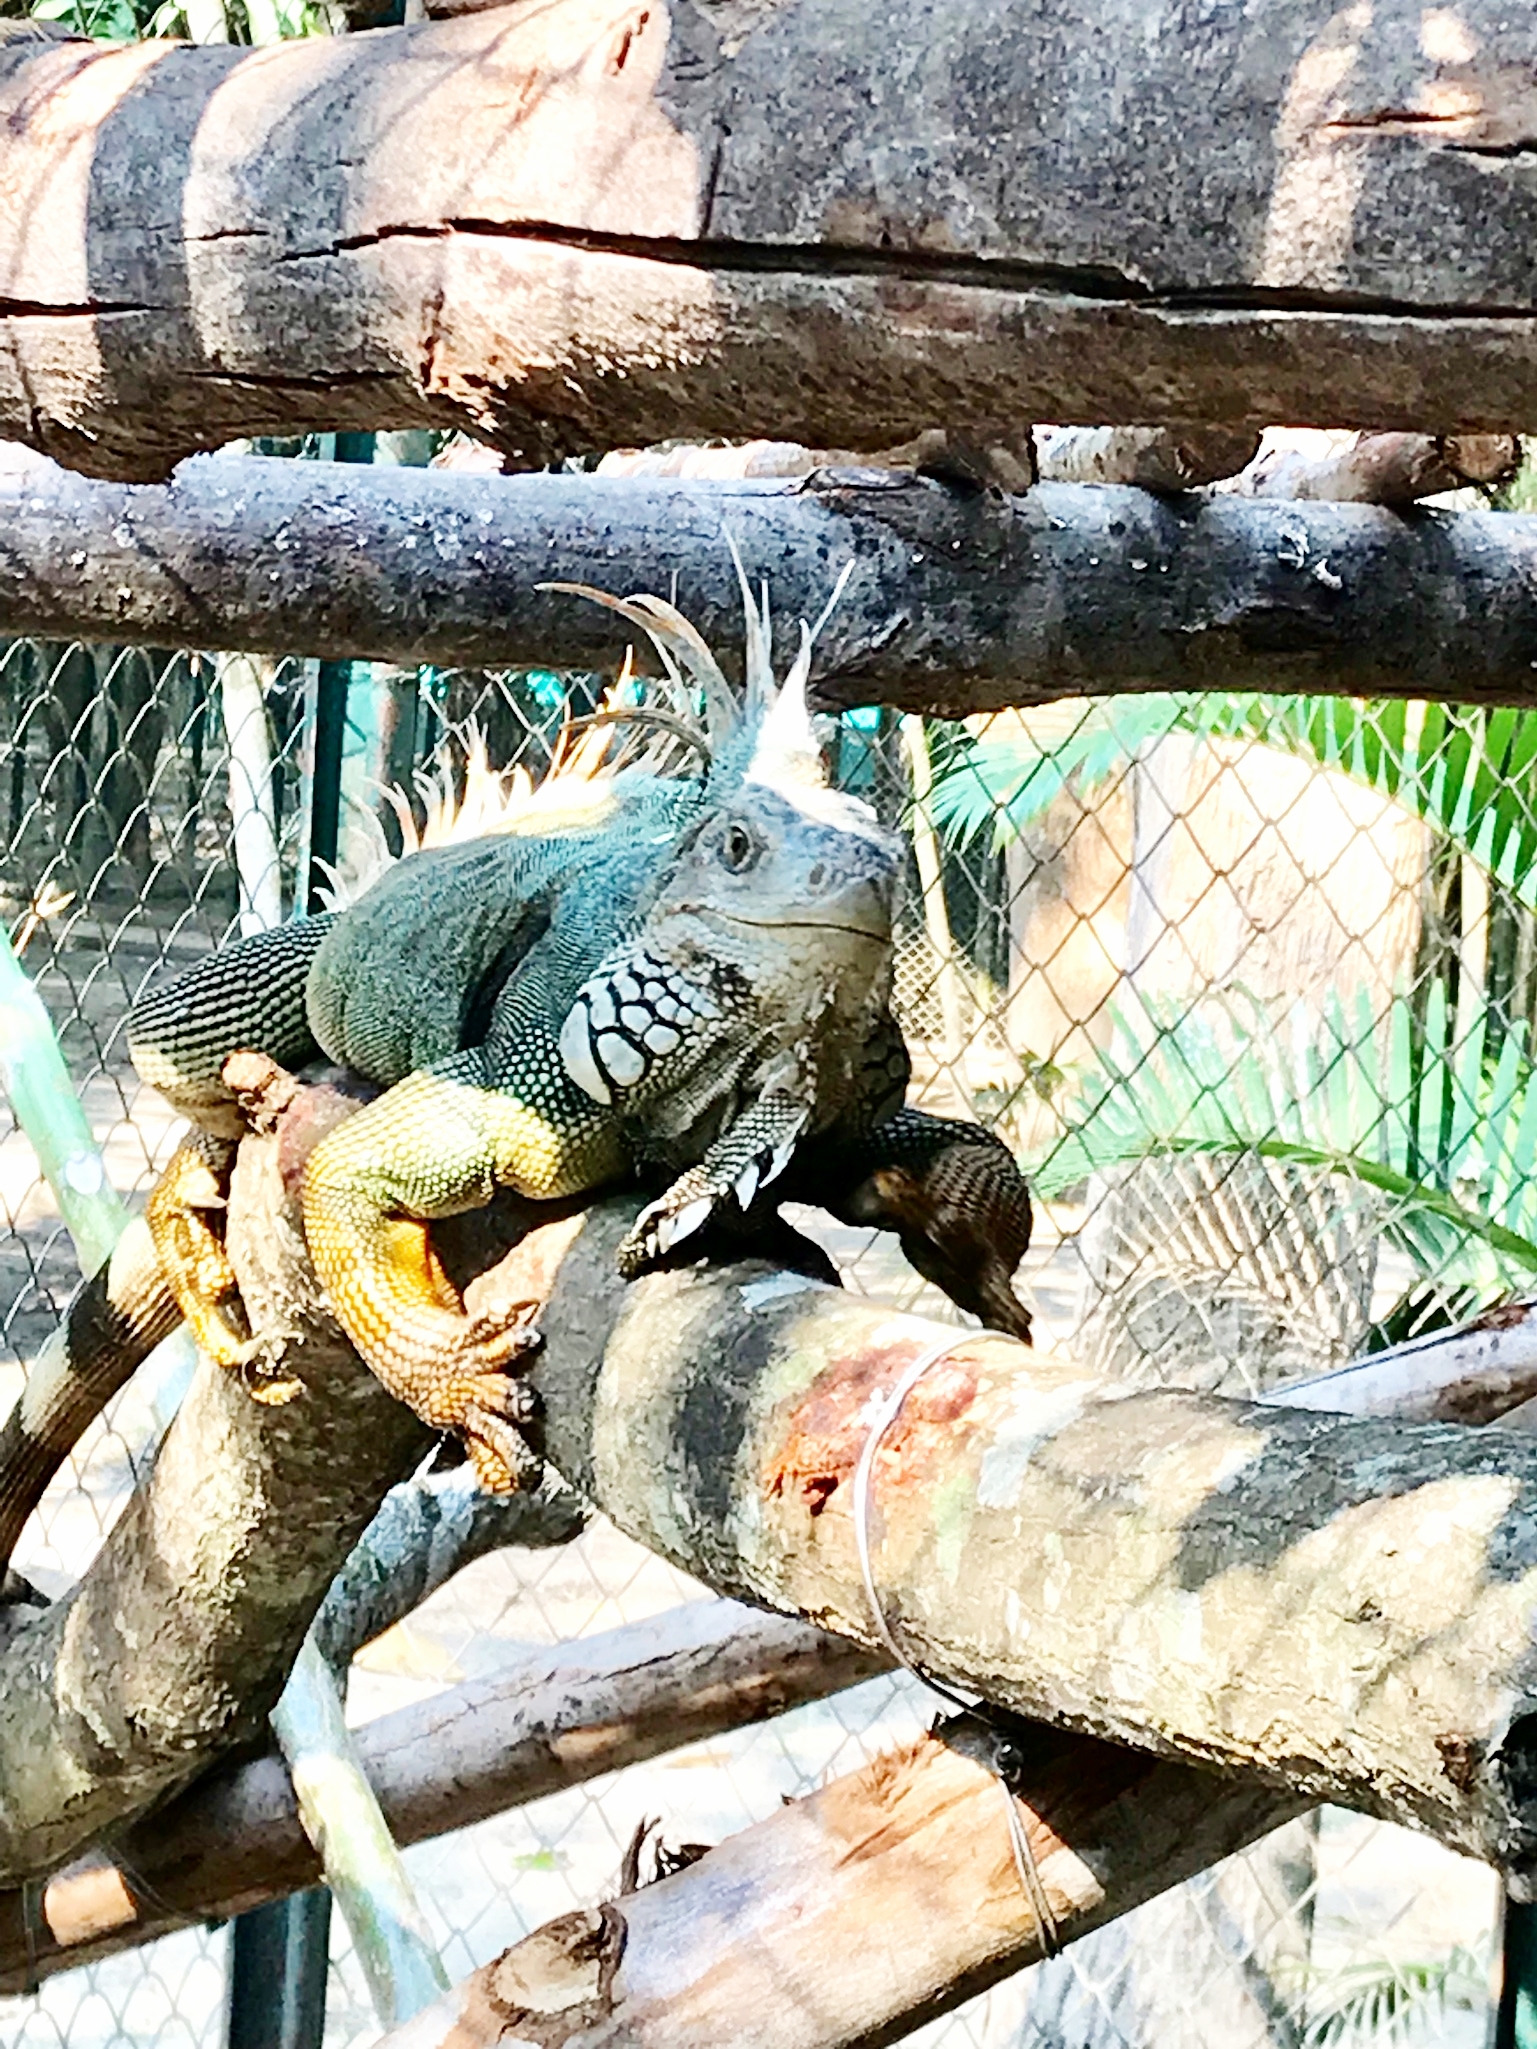 One of the resident iguanas at WFFT